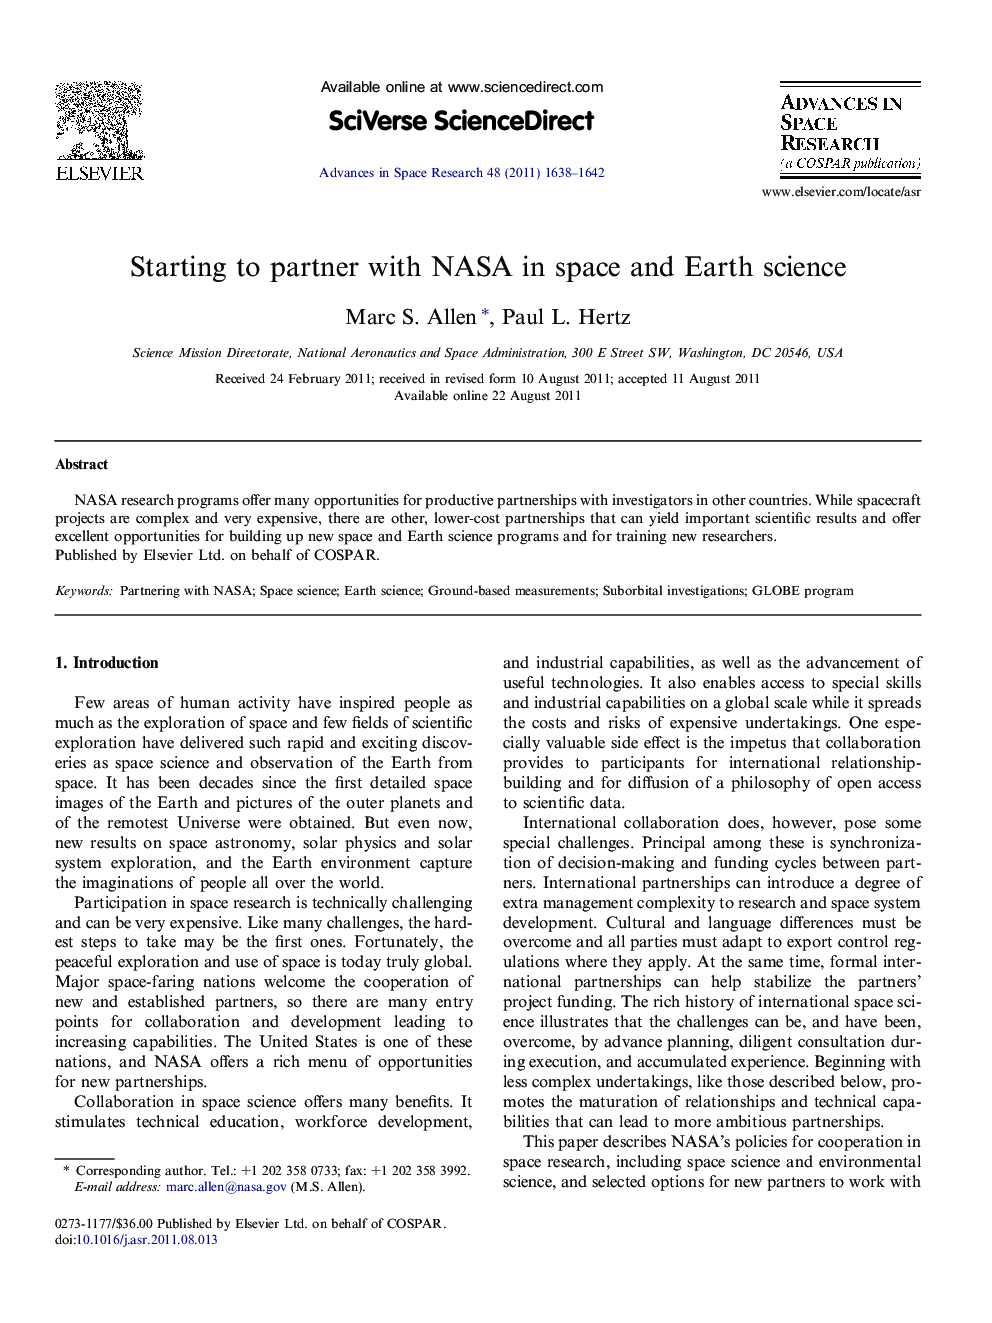 Starting to partner with NASA in space and Earth science